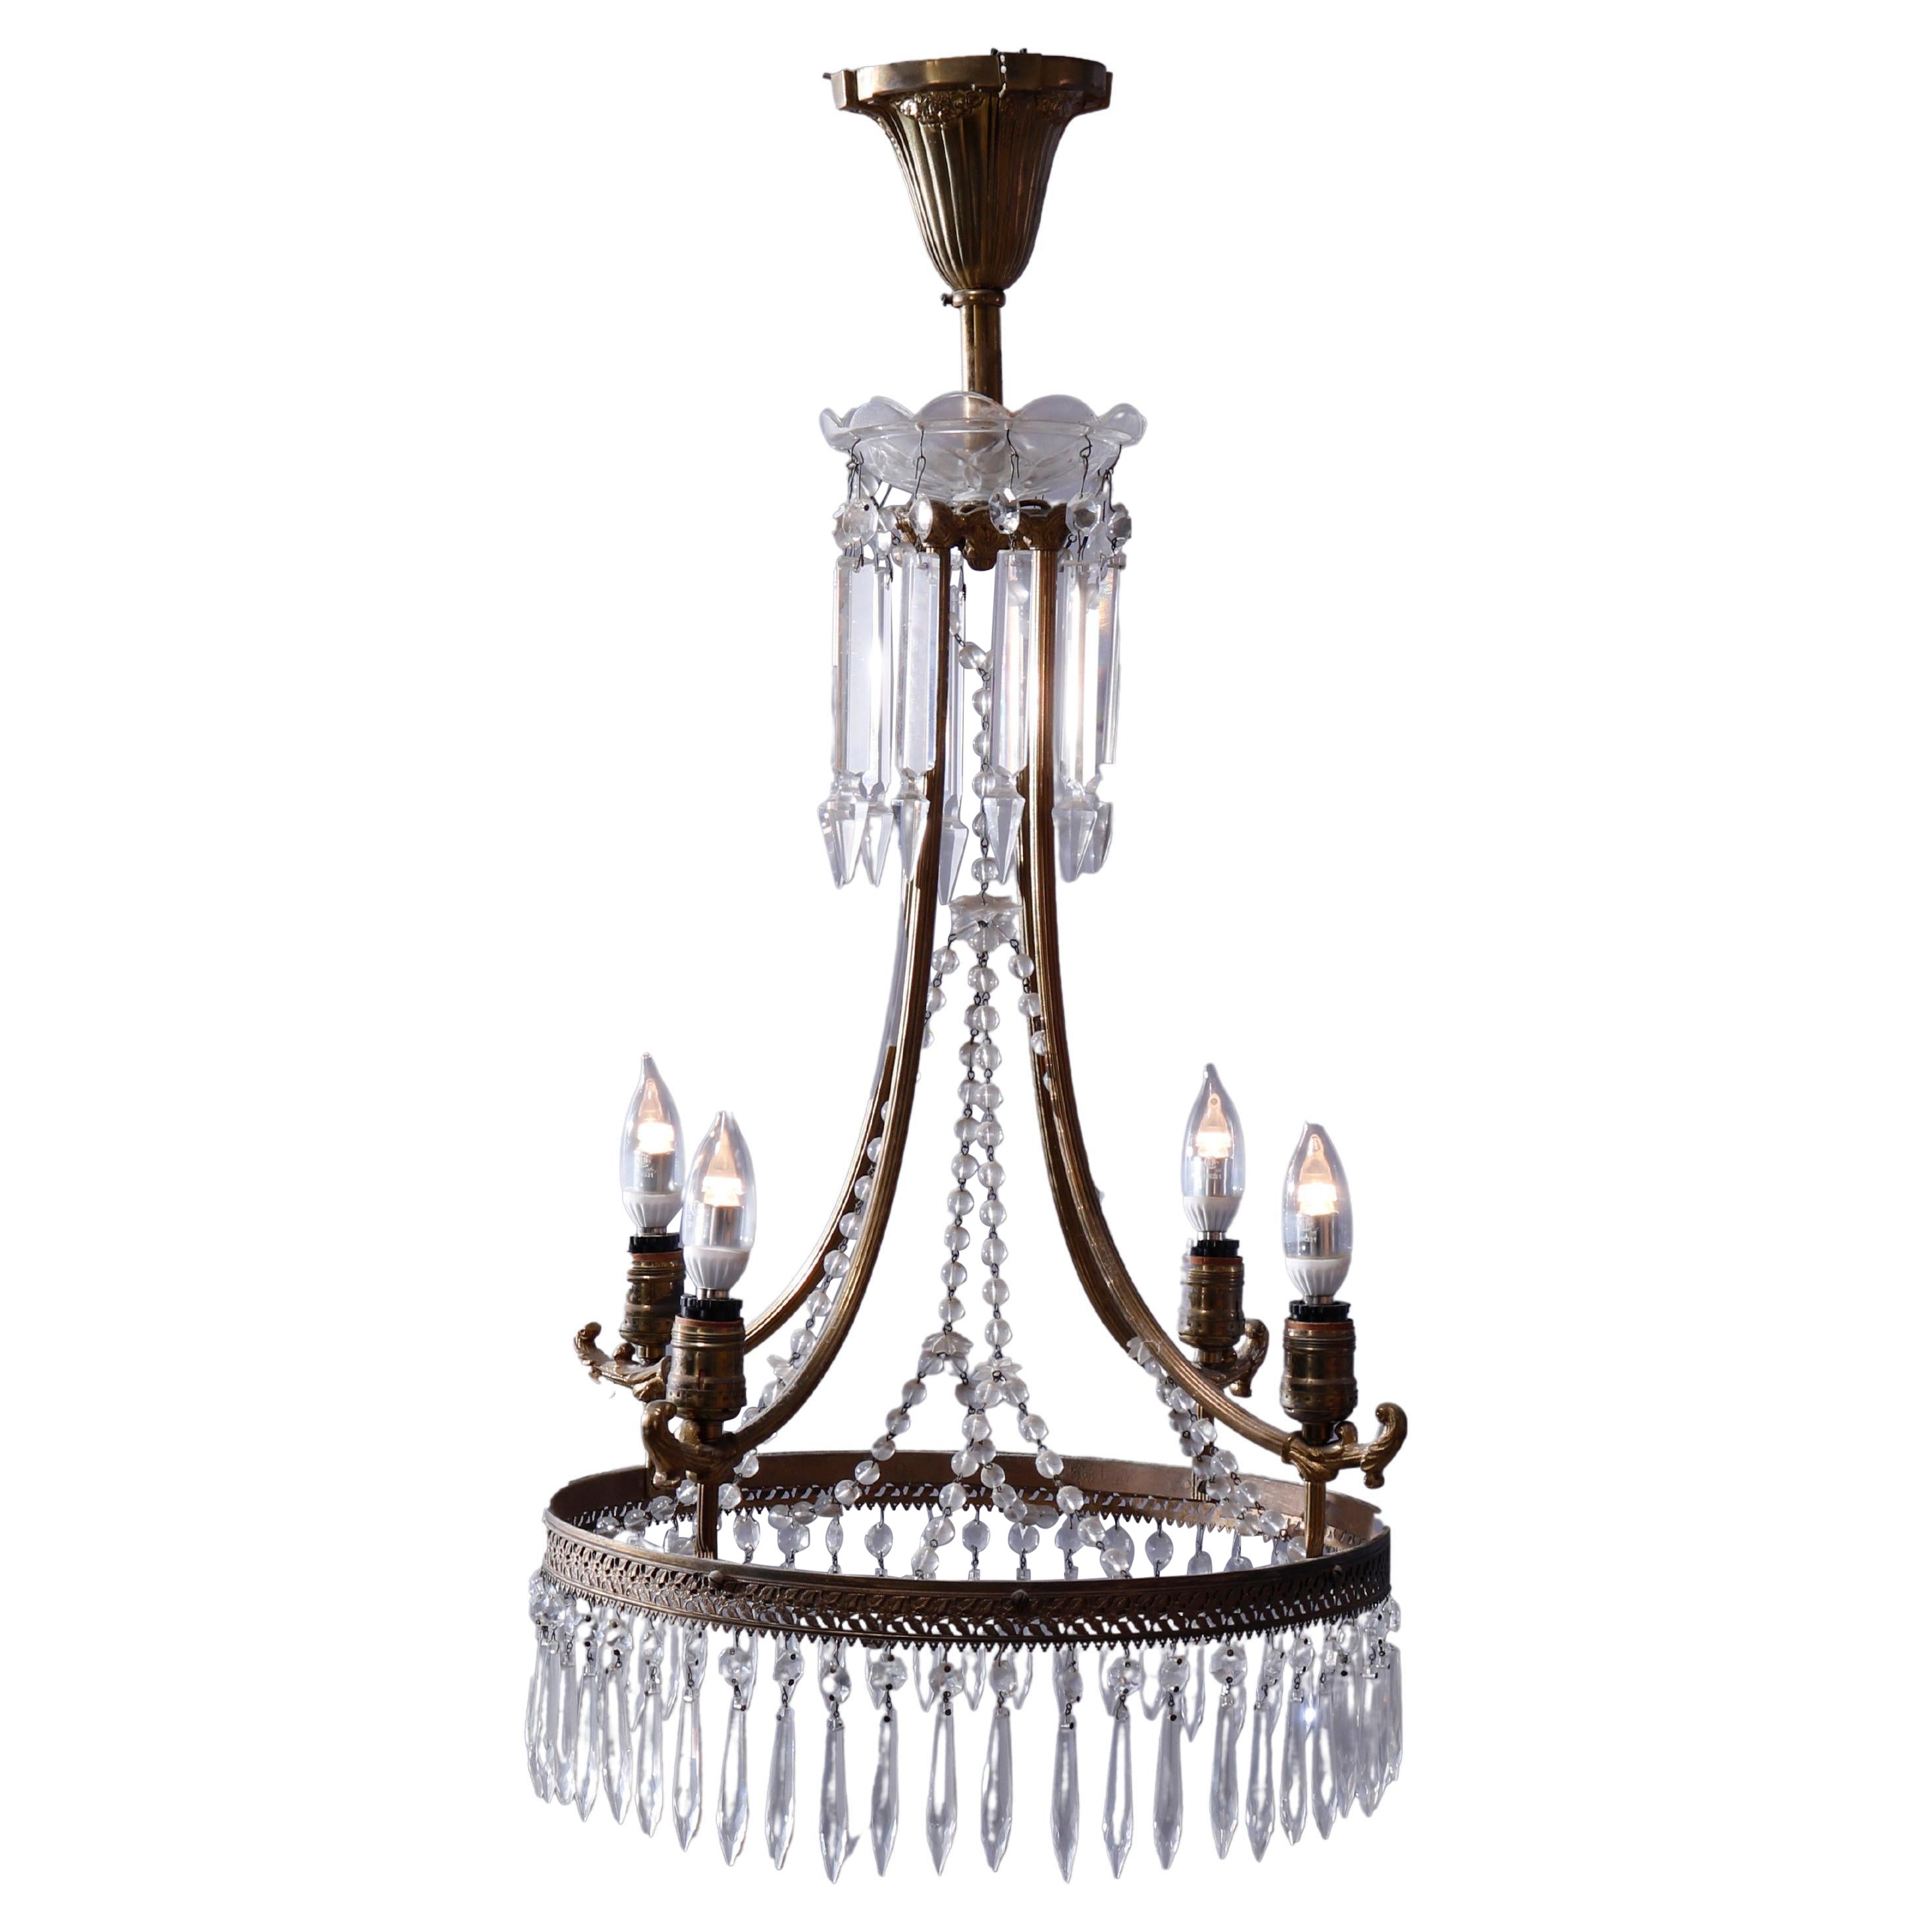 Antique French Style Bronzed Four-Light Chandelier with Draped Crystals, c1920